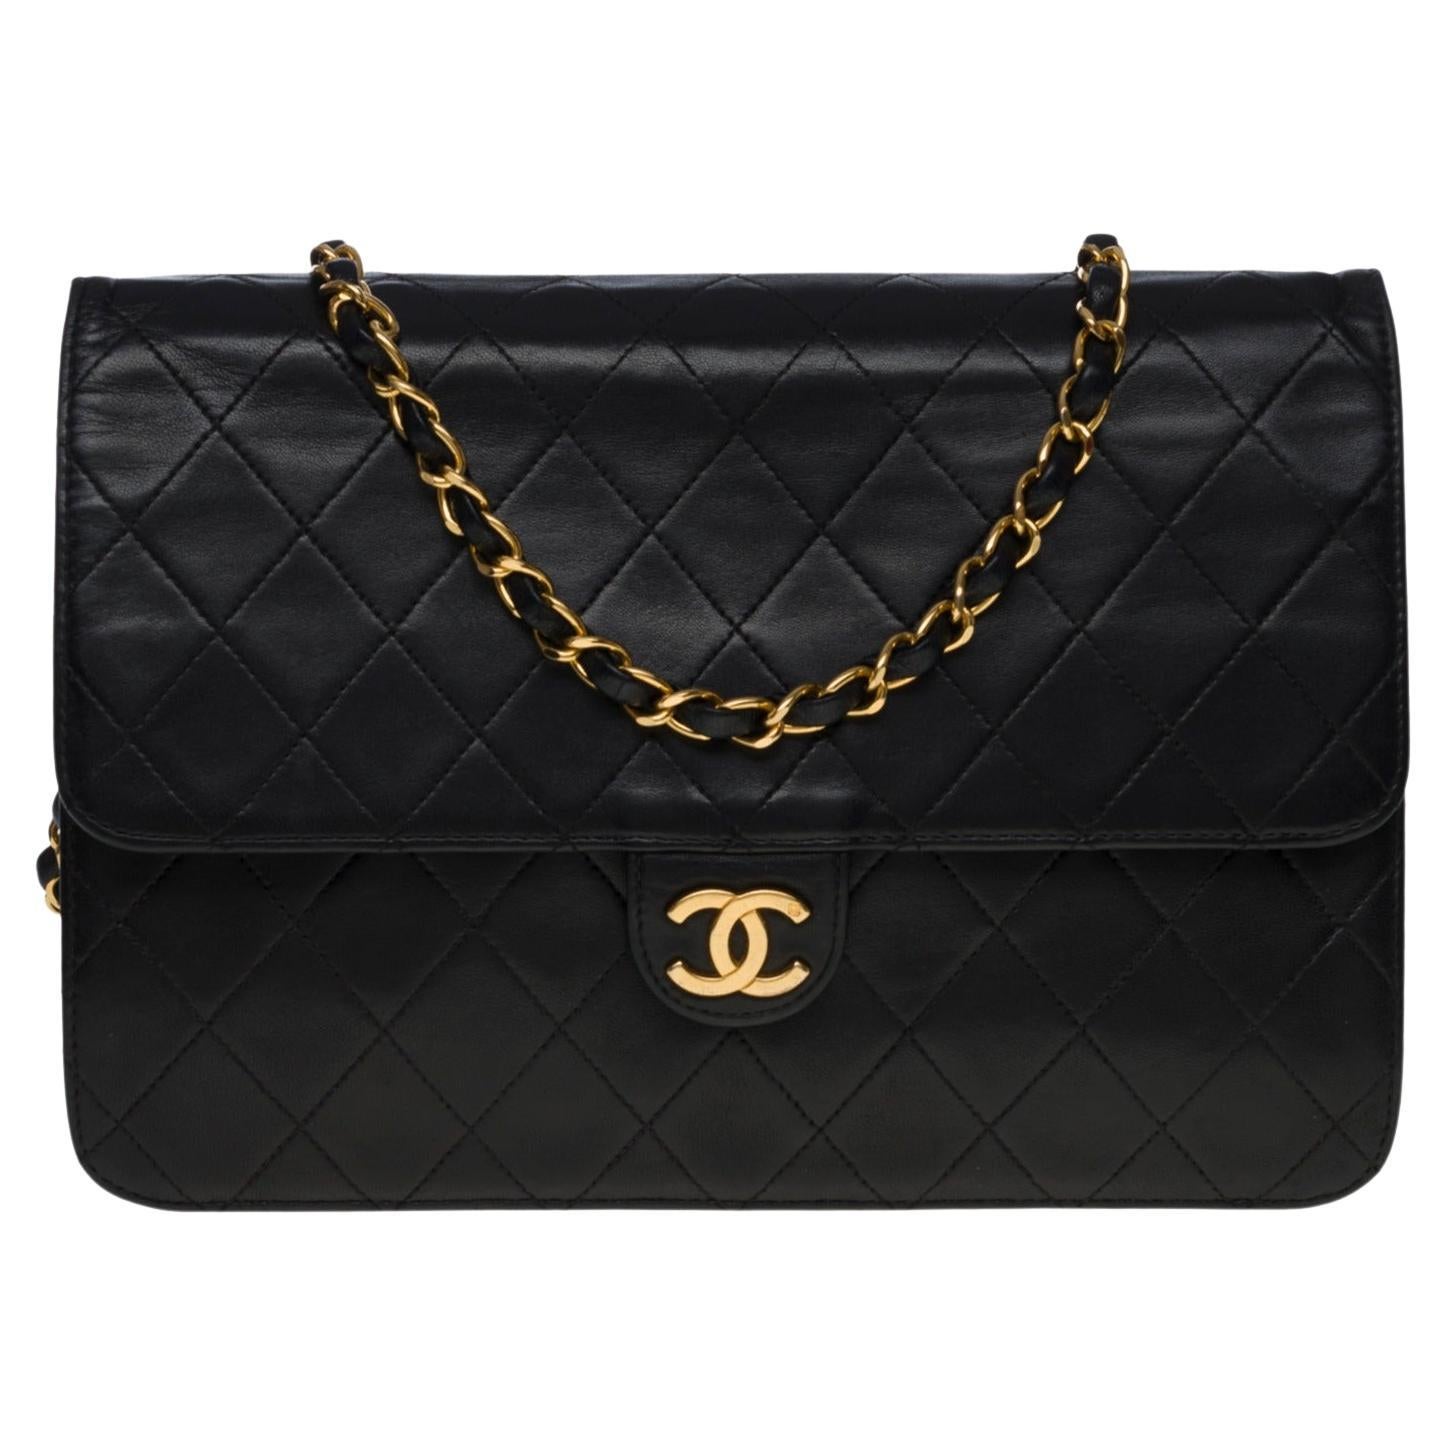 Chanel Classique flap bag bag in black quilted leather, GHW For Sale